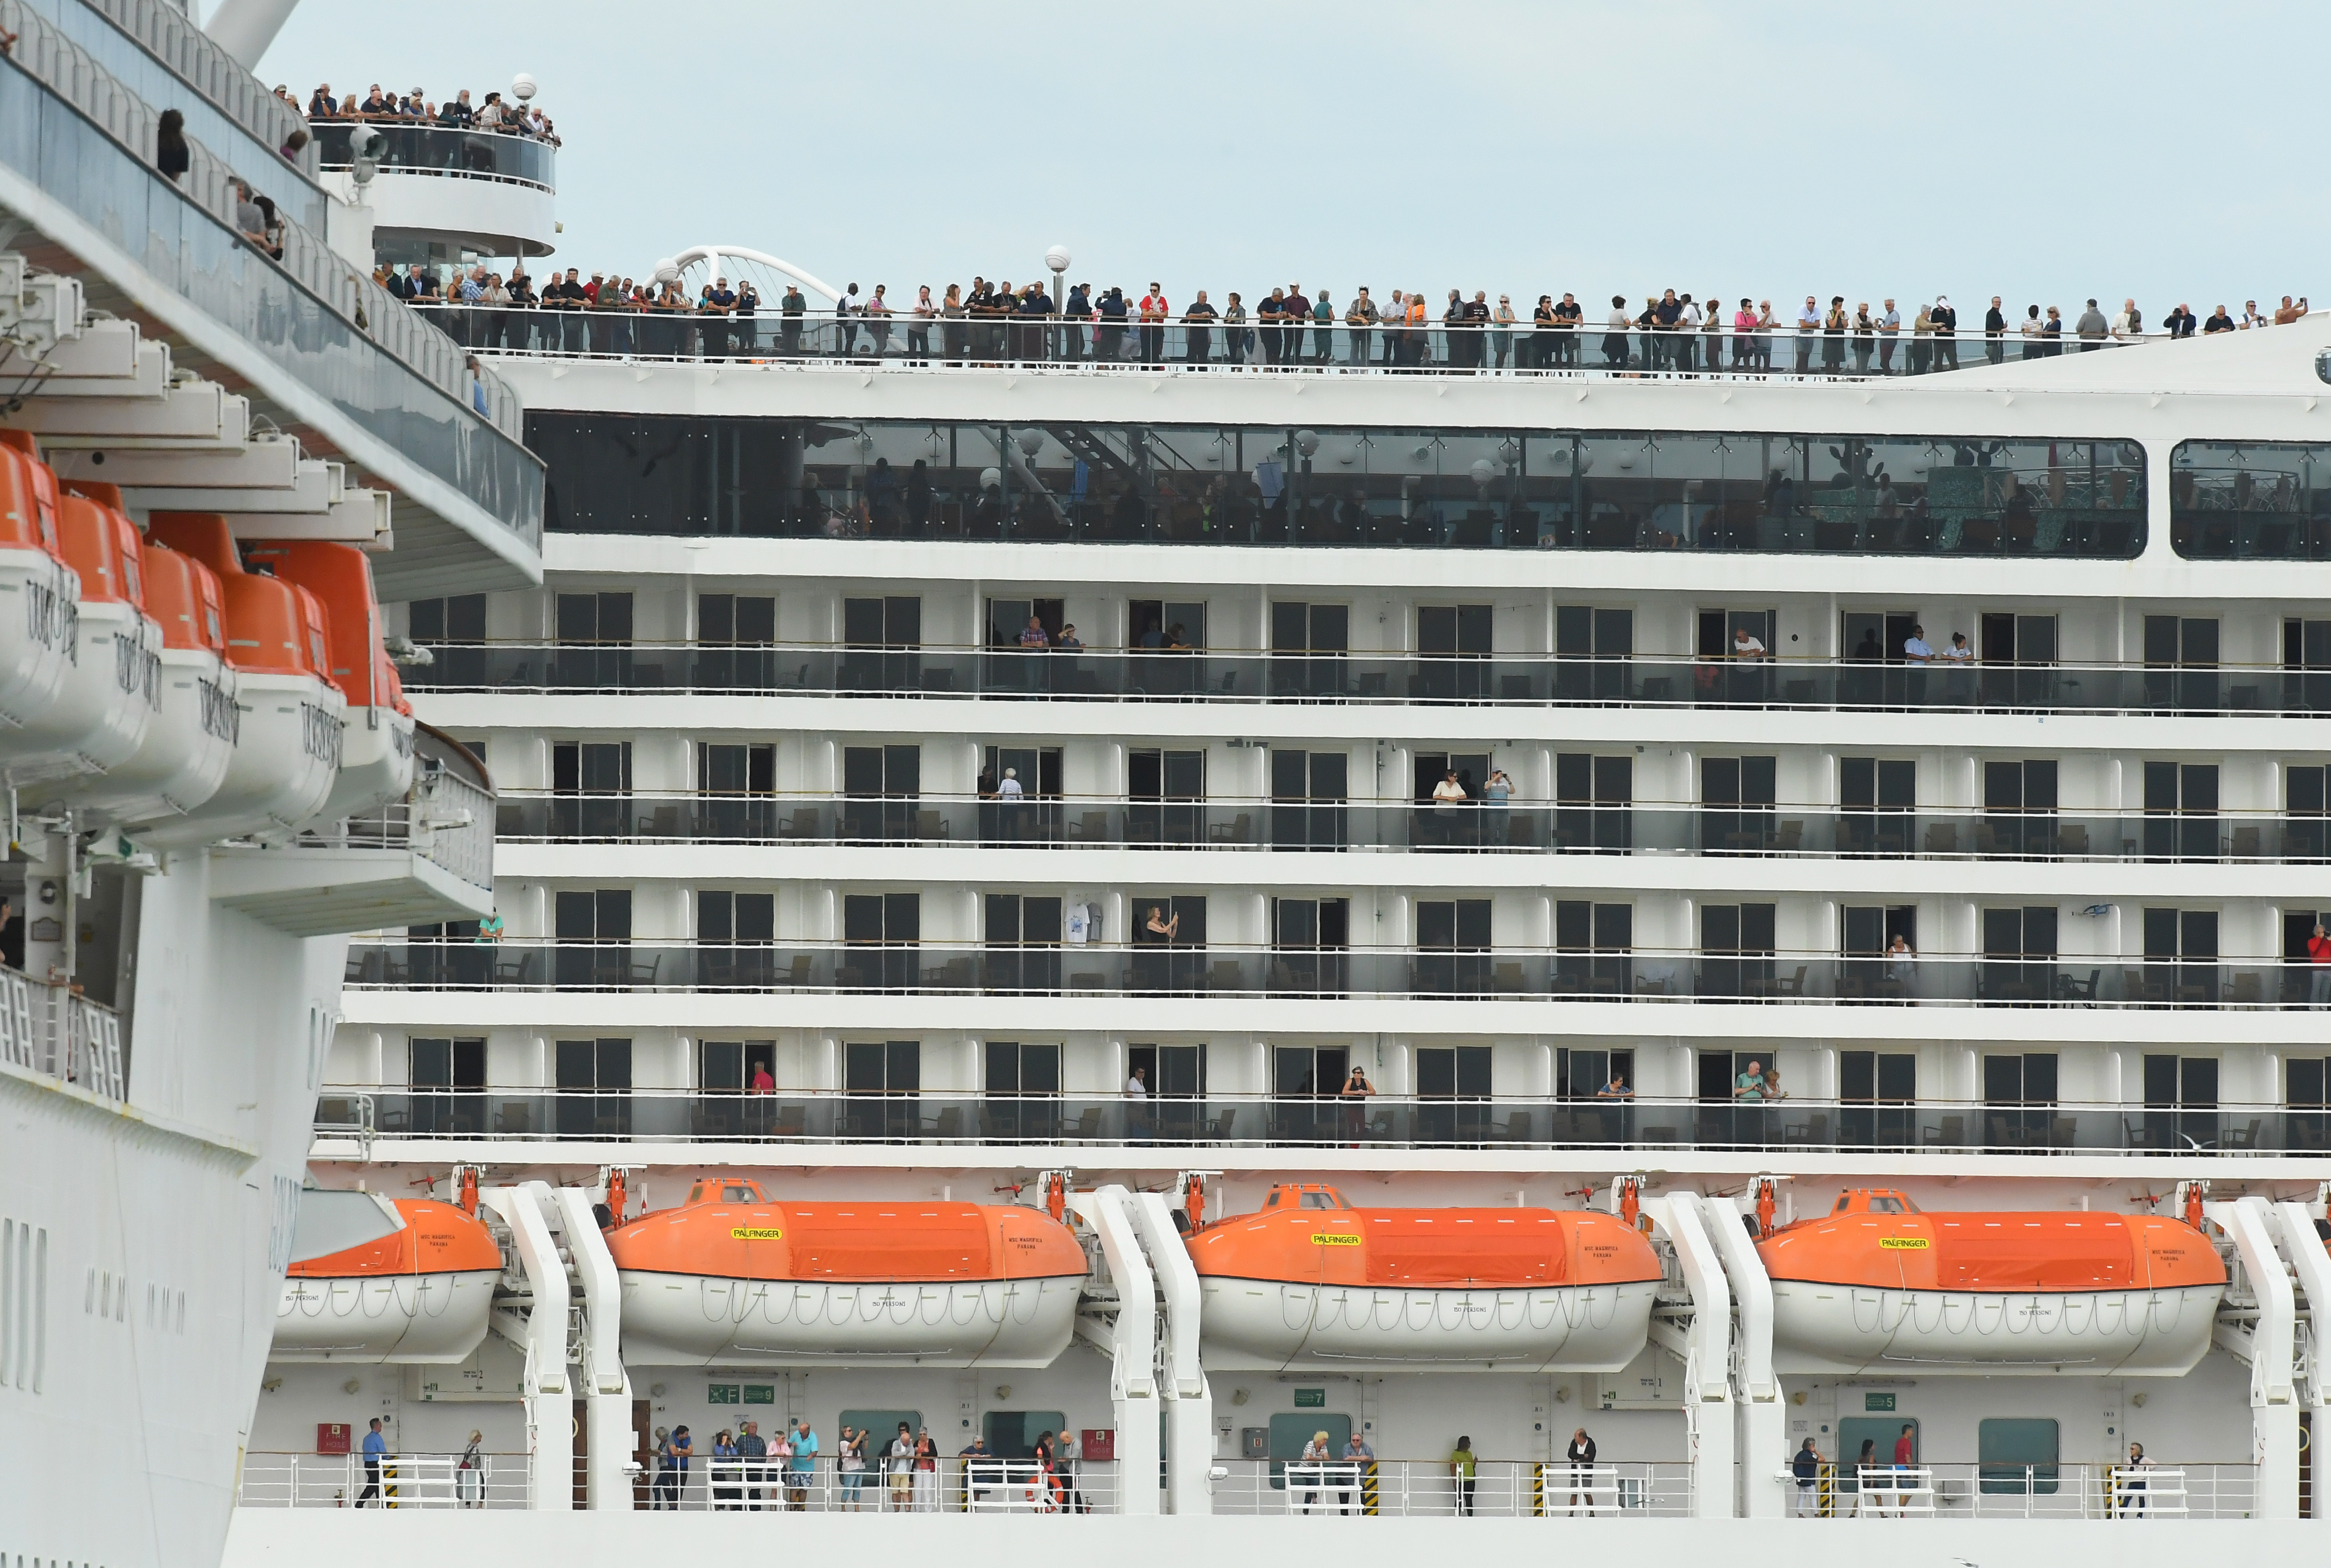 Passengers aboard the MSC Magnifica cruise ship are seen while docked alongside the Golden Princess cruise ship (left) at Station Pier in Melbourne, Thursday, March 19, 2020. 